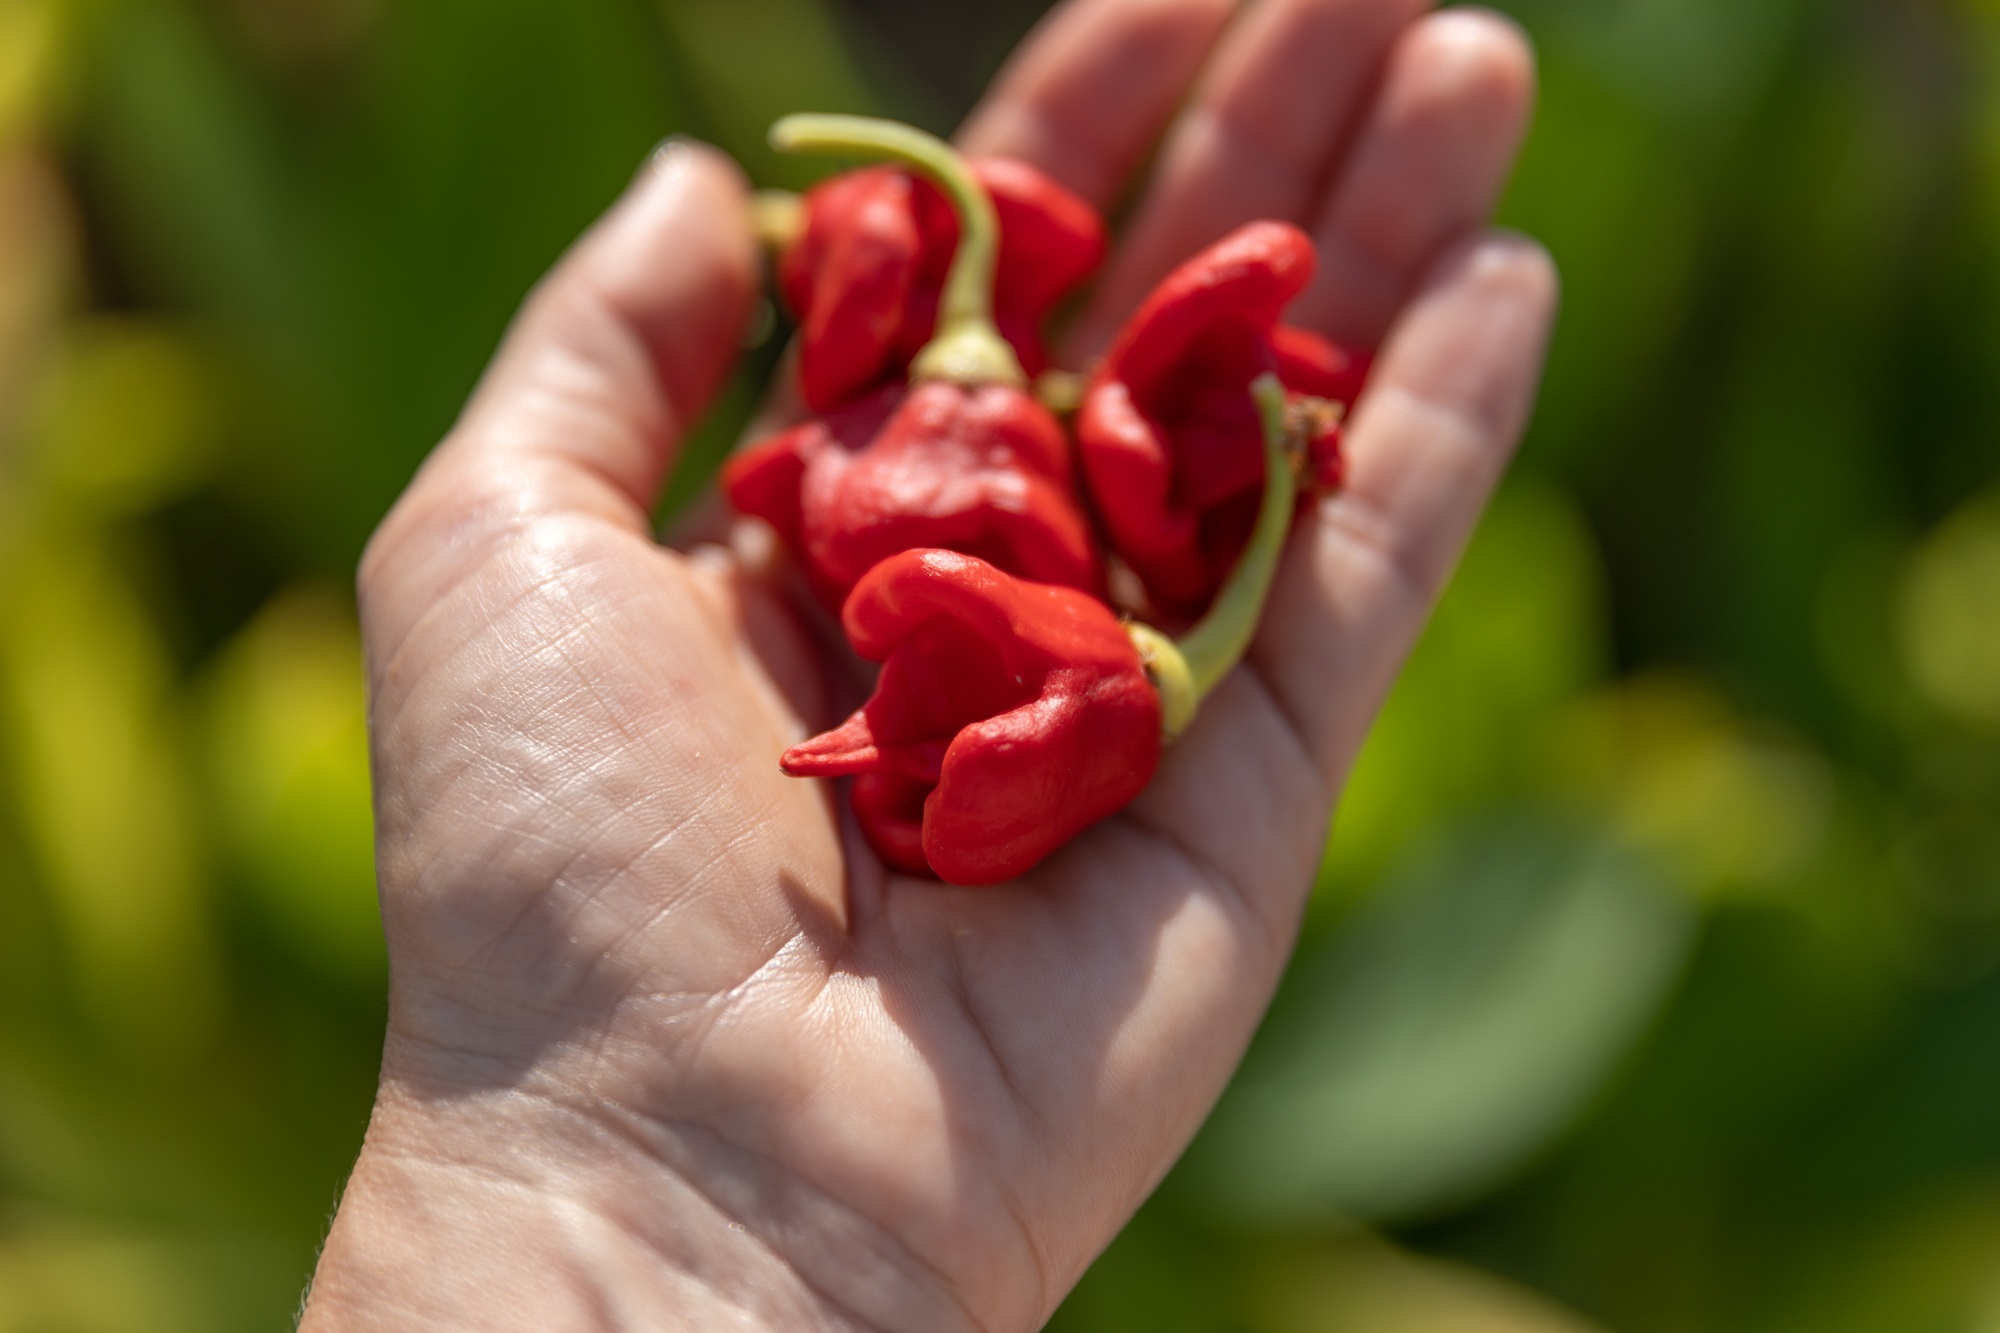 What would possess someone to eat a Carolina Reaper pepper? This writer tried to find out.